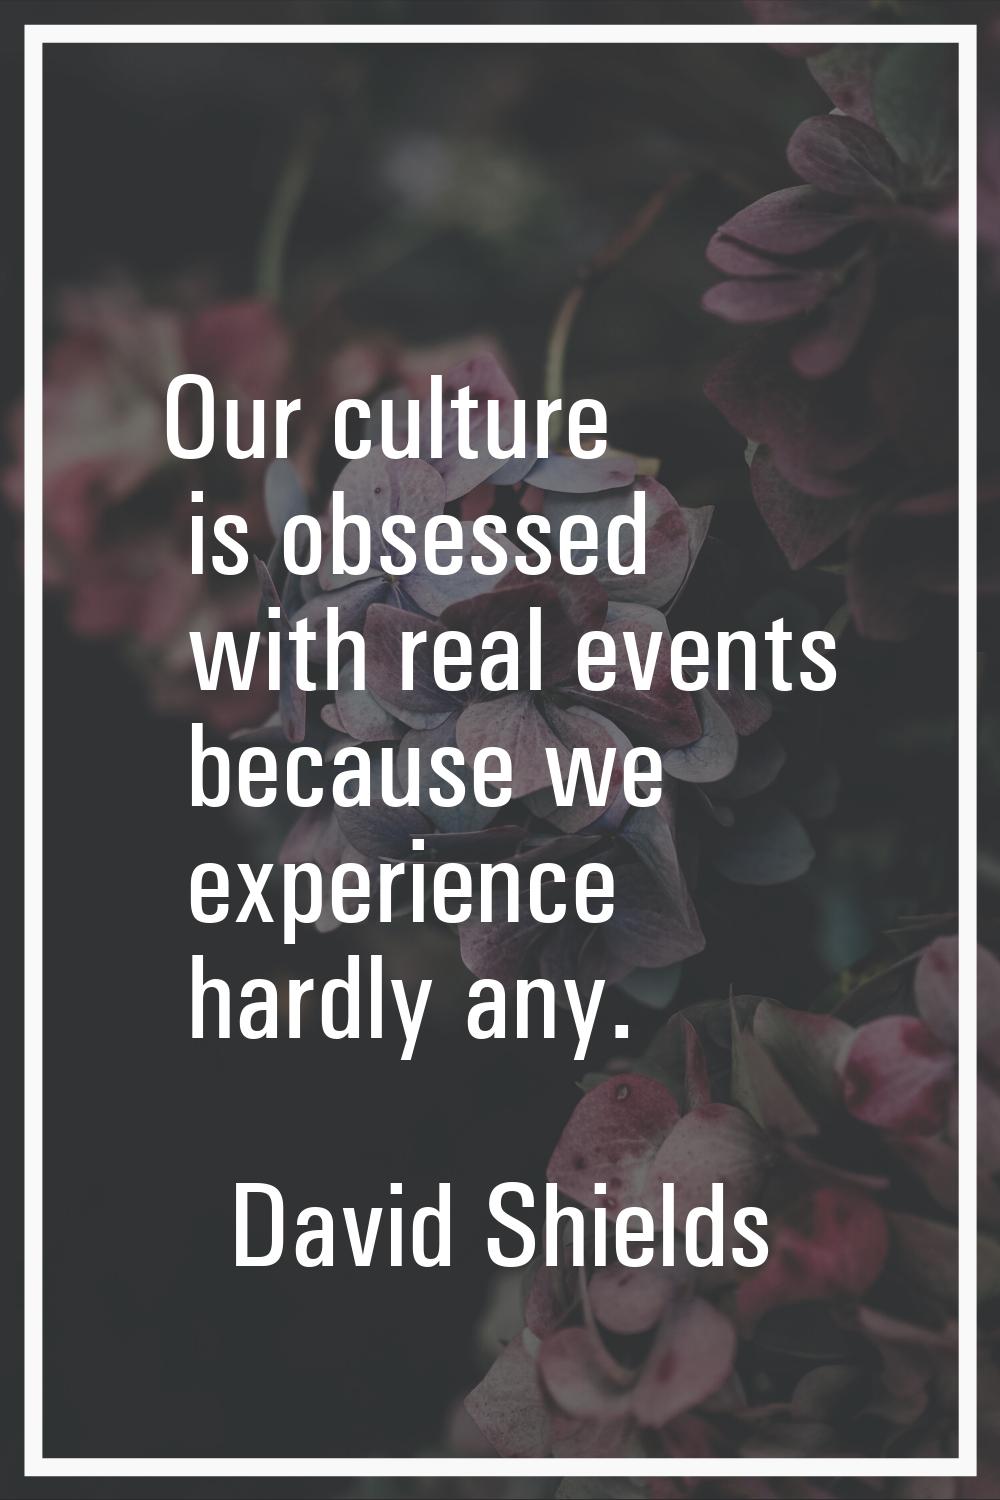 Our culture is obsessed with real events because we experience hardly any.